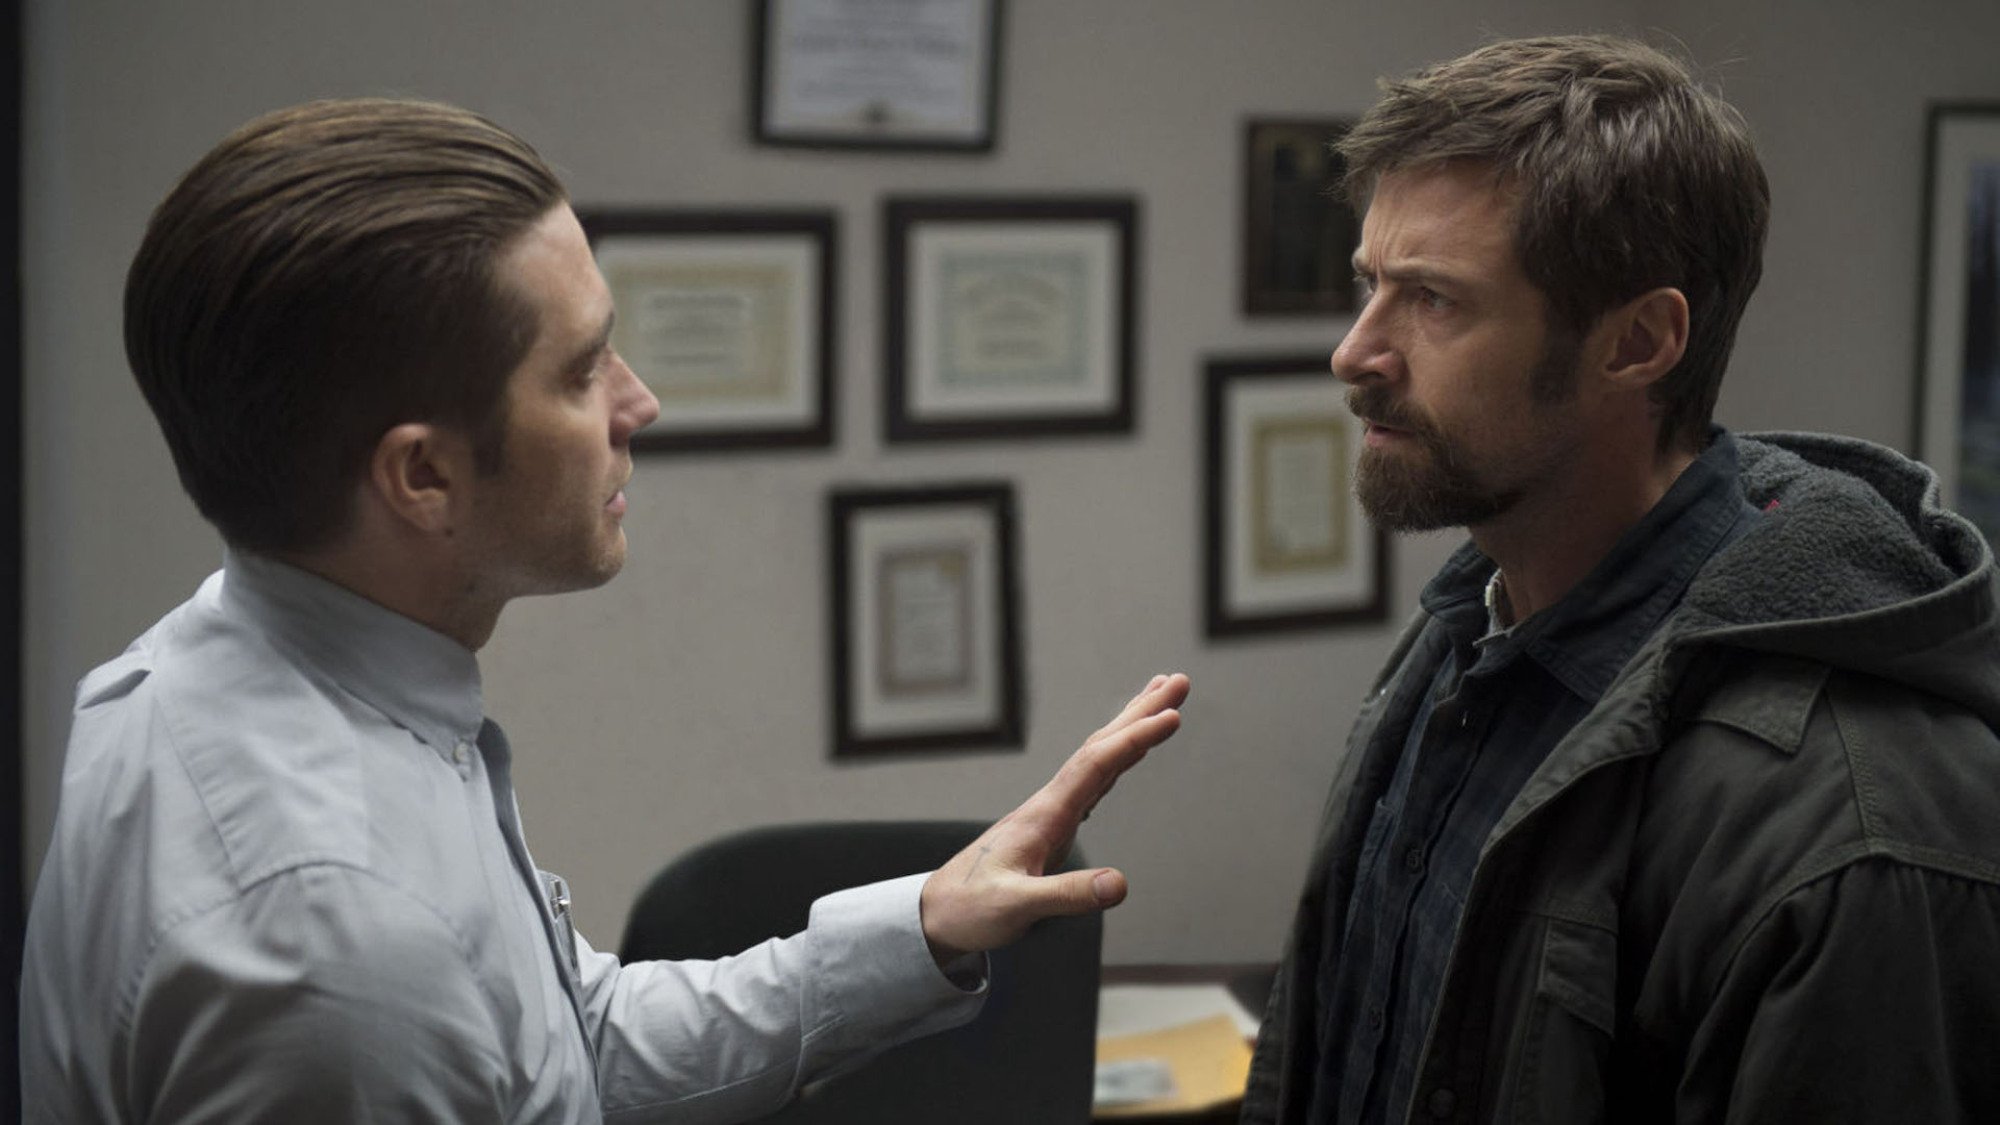 Jake Gyllenhaal tries to calm Hugh Jackman in a police station in the film "Prisoners"